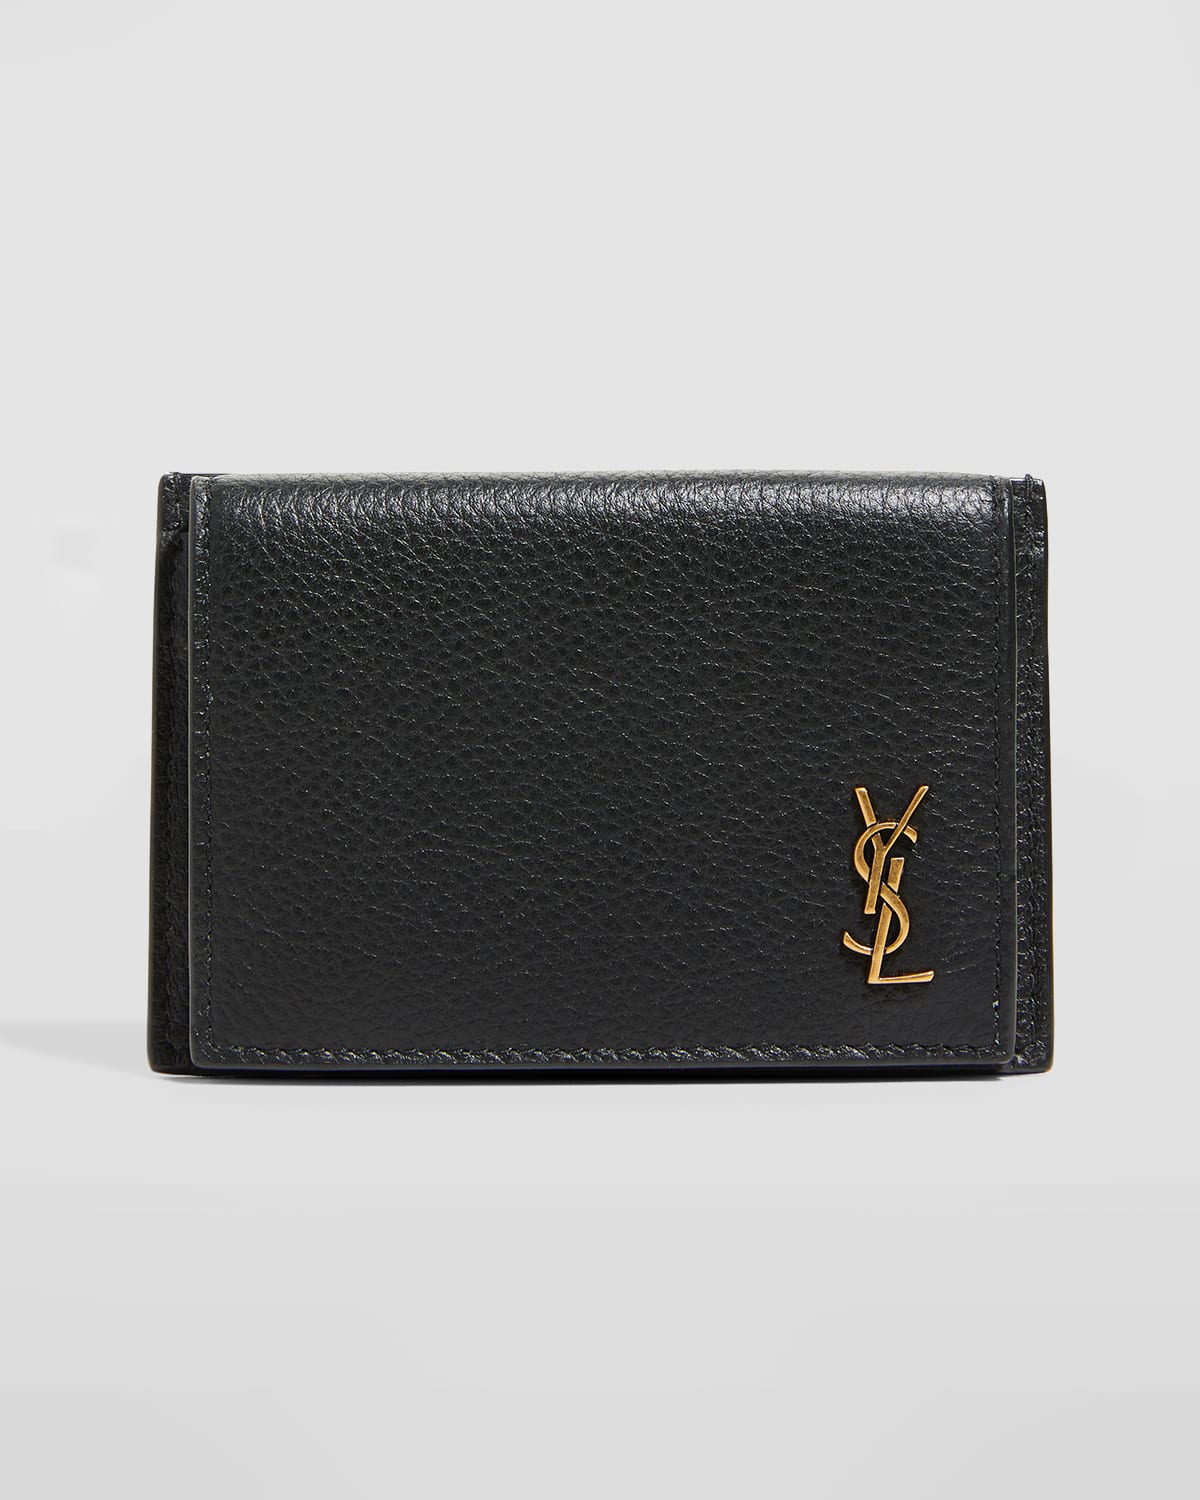 YSL Flap Leather Card Case